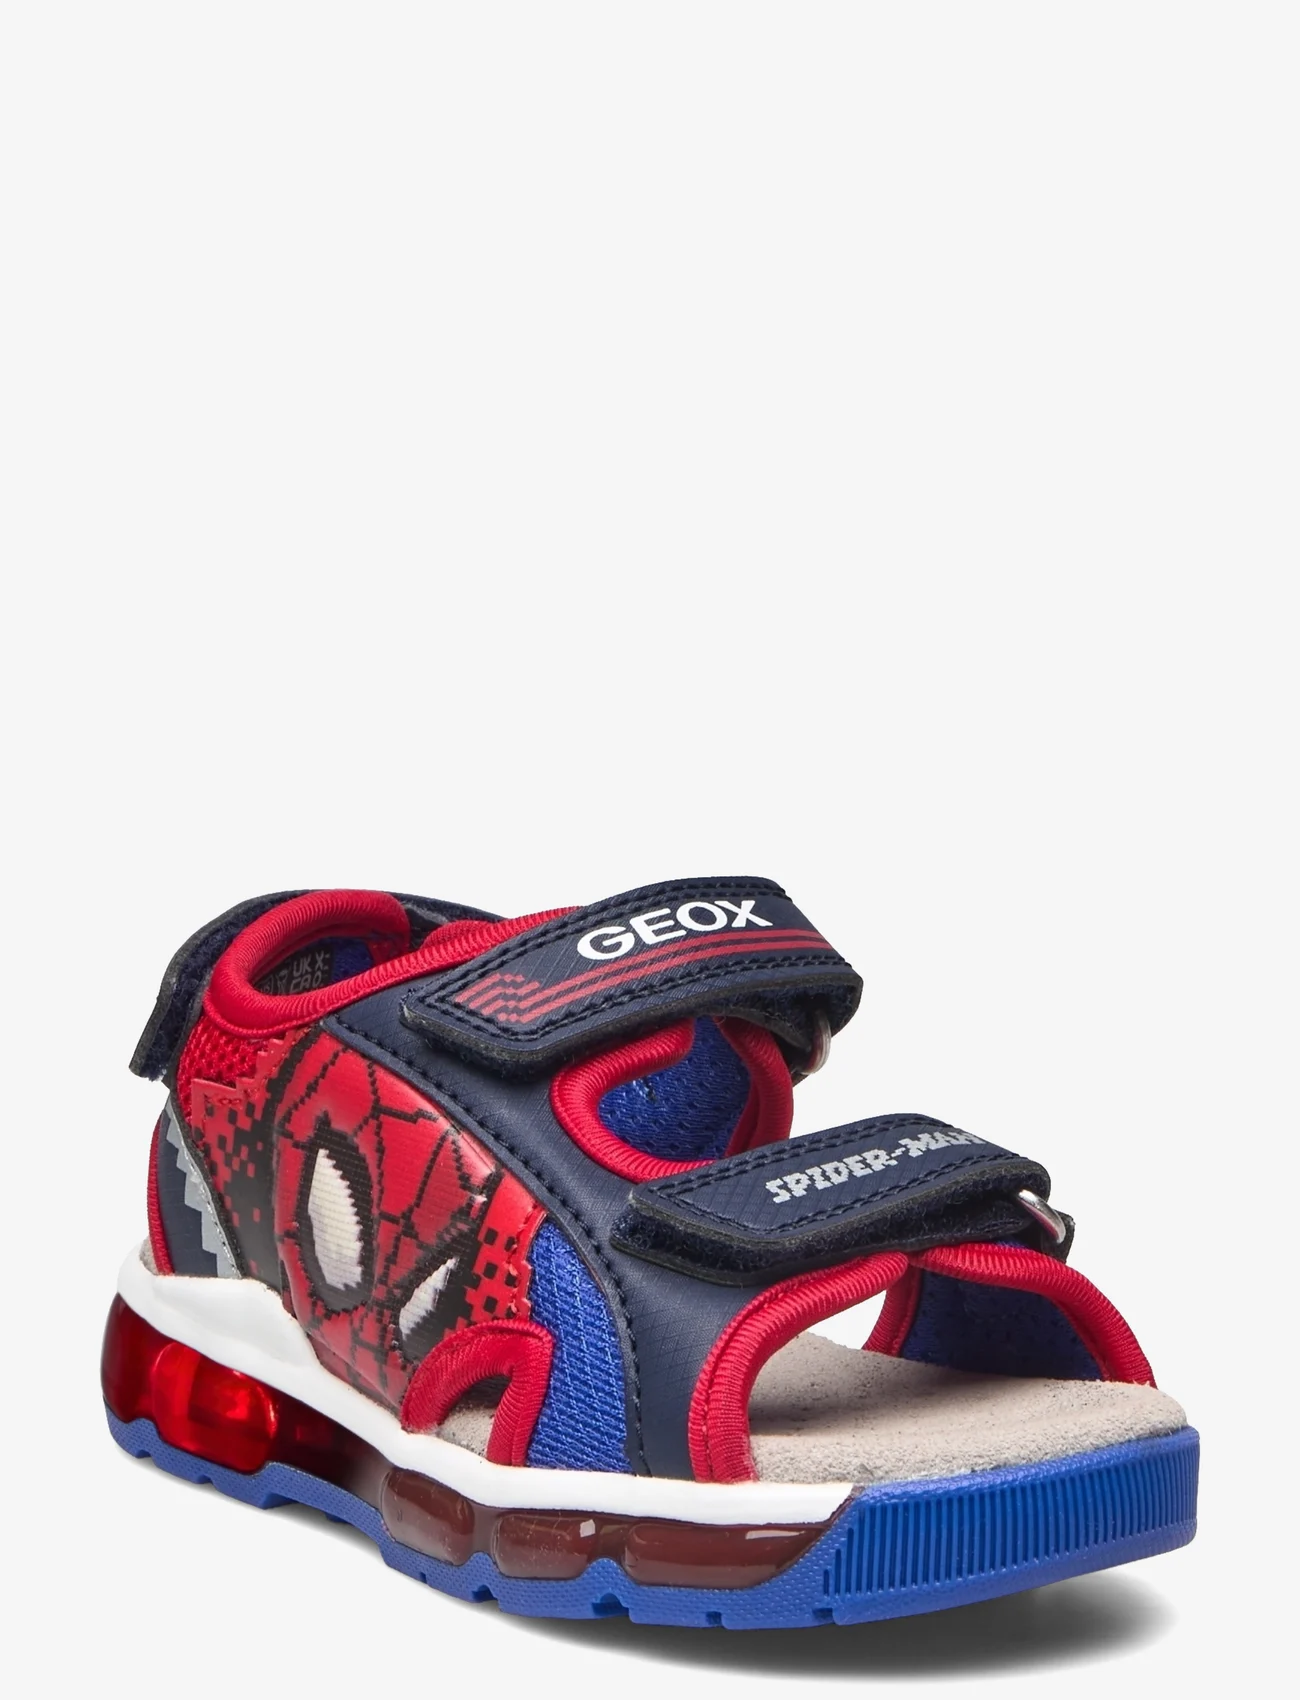 GEOX - J SANDAL ANDROID BOY - sommarfynd - navy/red - 0